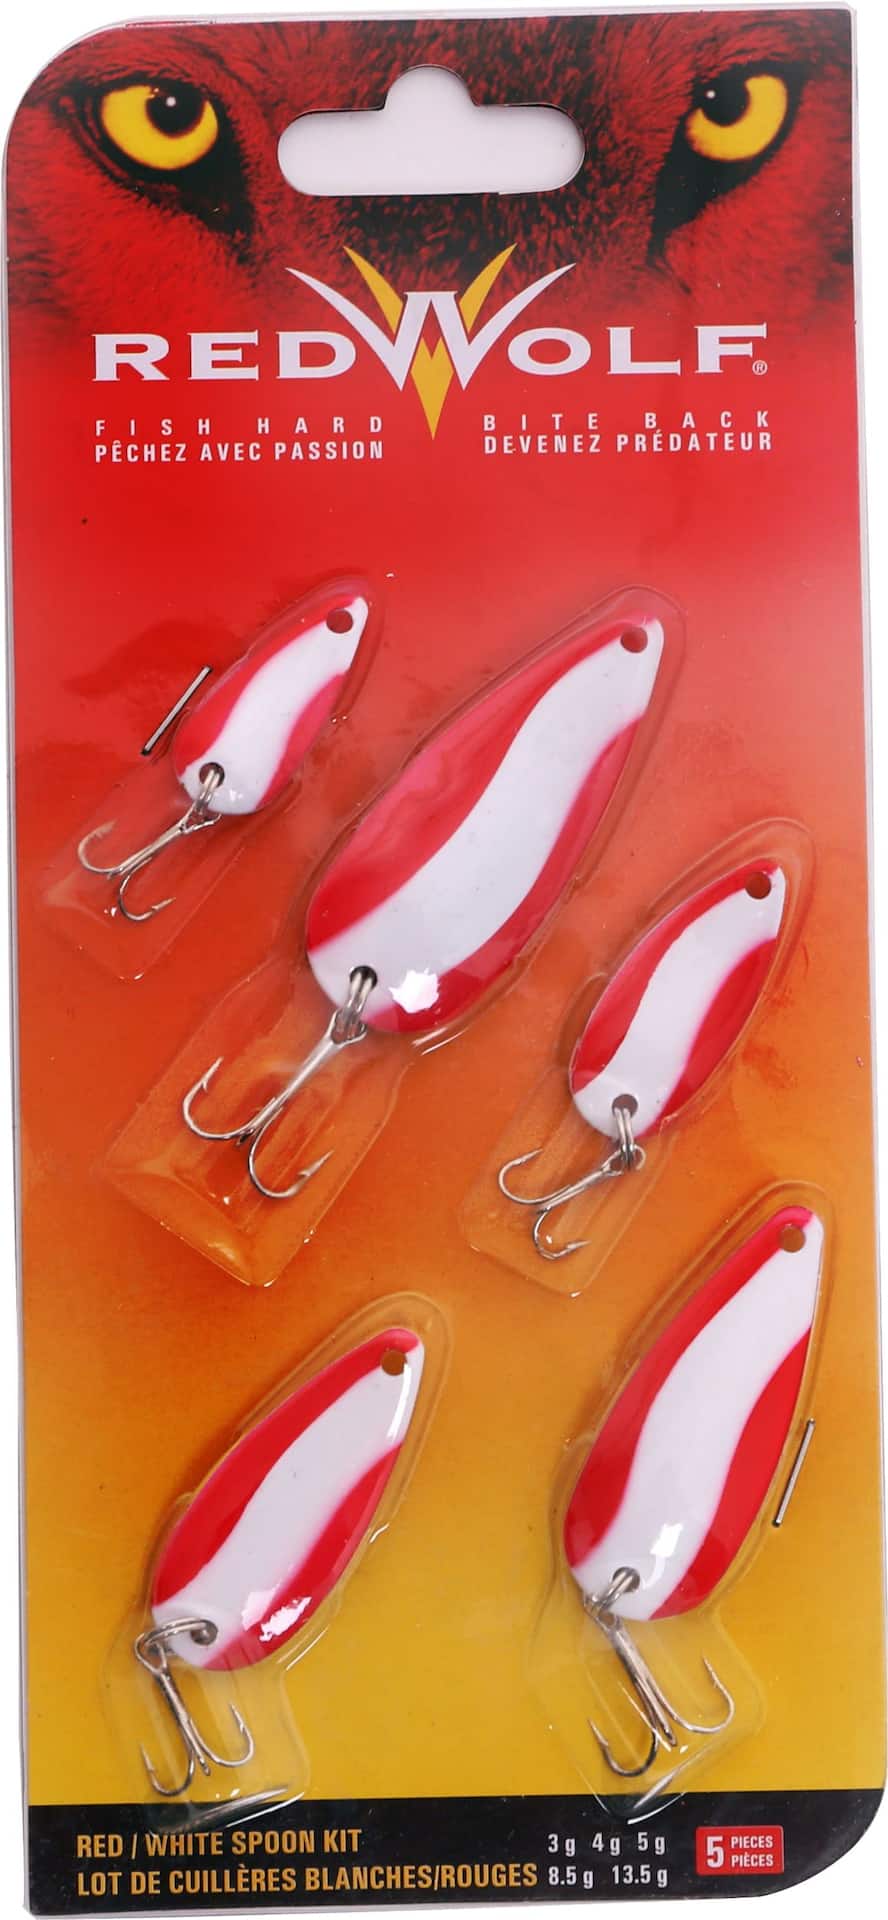 https://media-www.canadiantire.ca/product/playing/fishing/fishing-lures/0777755/red-wolf-spoon-kit-red-white-4d8b15e3-cd6d-4524-b6d9-62aace423b30-jpgrendition.jpg